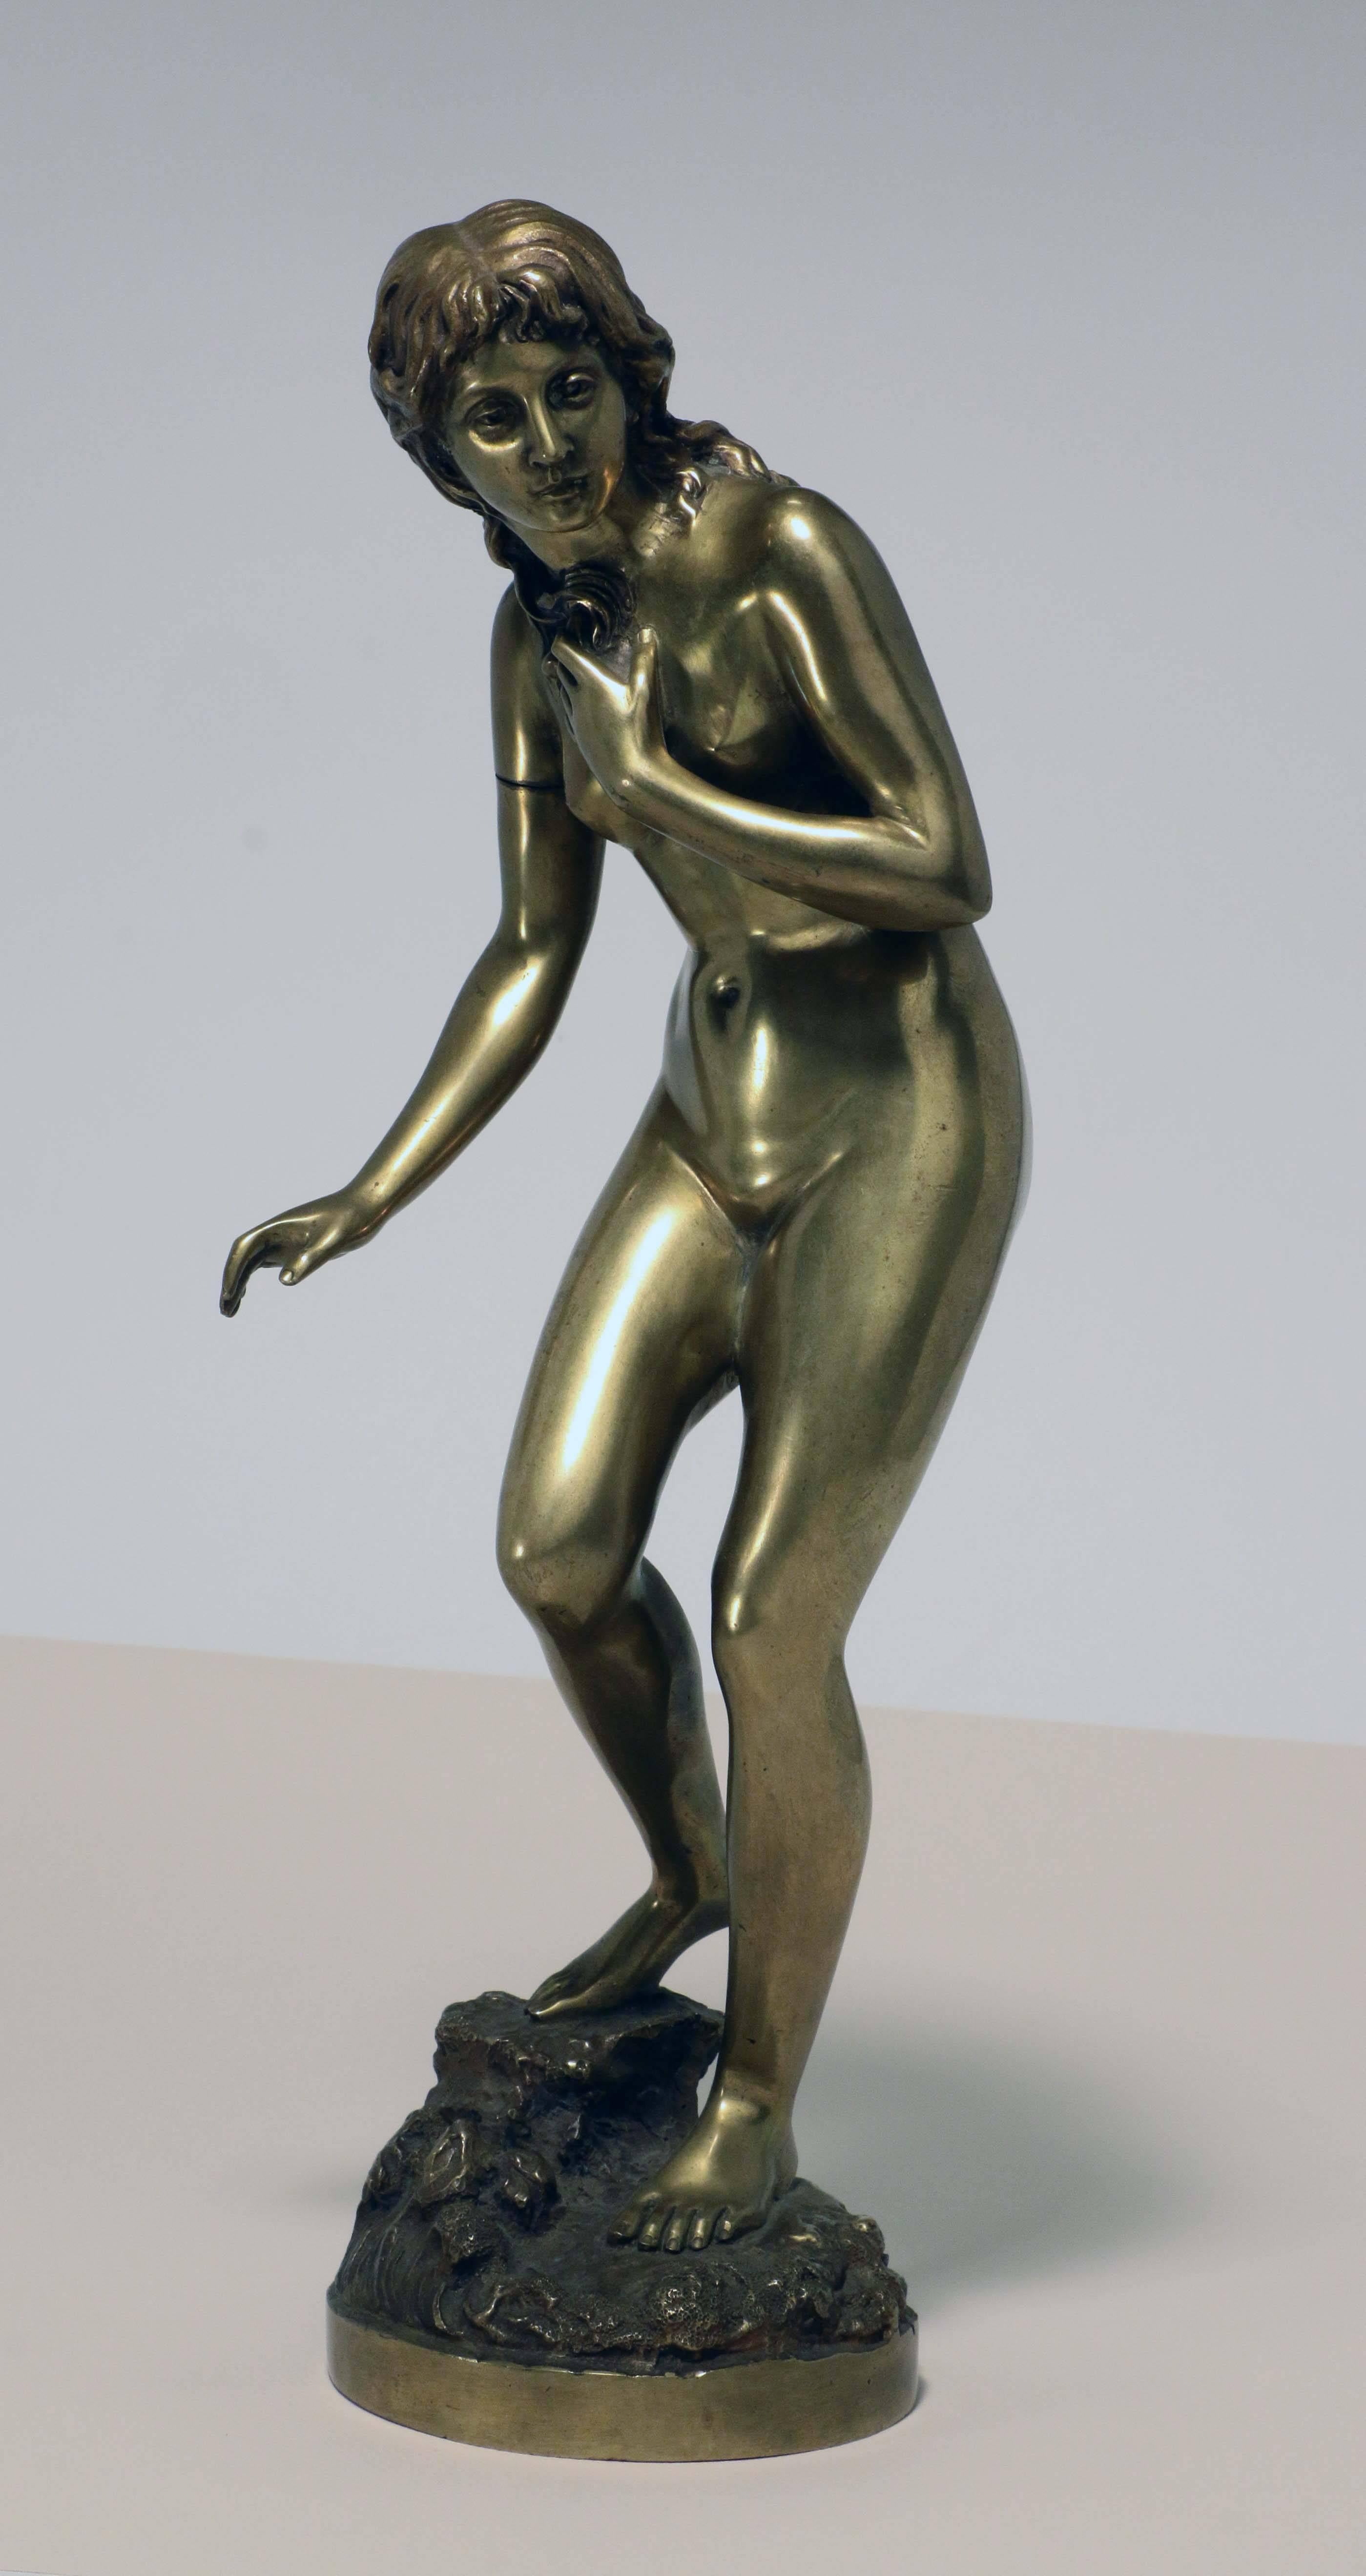 This bronze figure of a nude maiden dates from the early 20th century. She crouches slightly as she enters the water, one foot on a rocky outcrop, with stylized waves at her feet. According to Berman this artist flourished at the turn of the century.